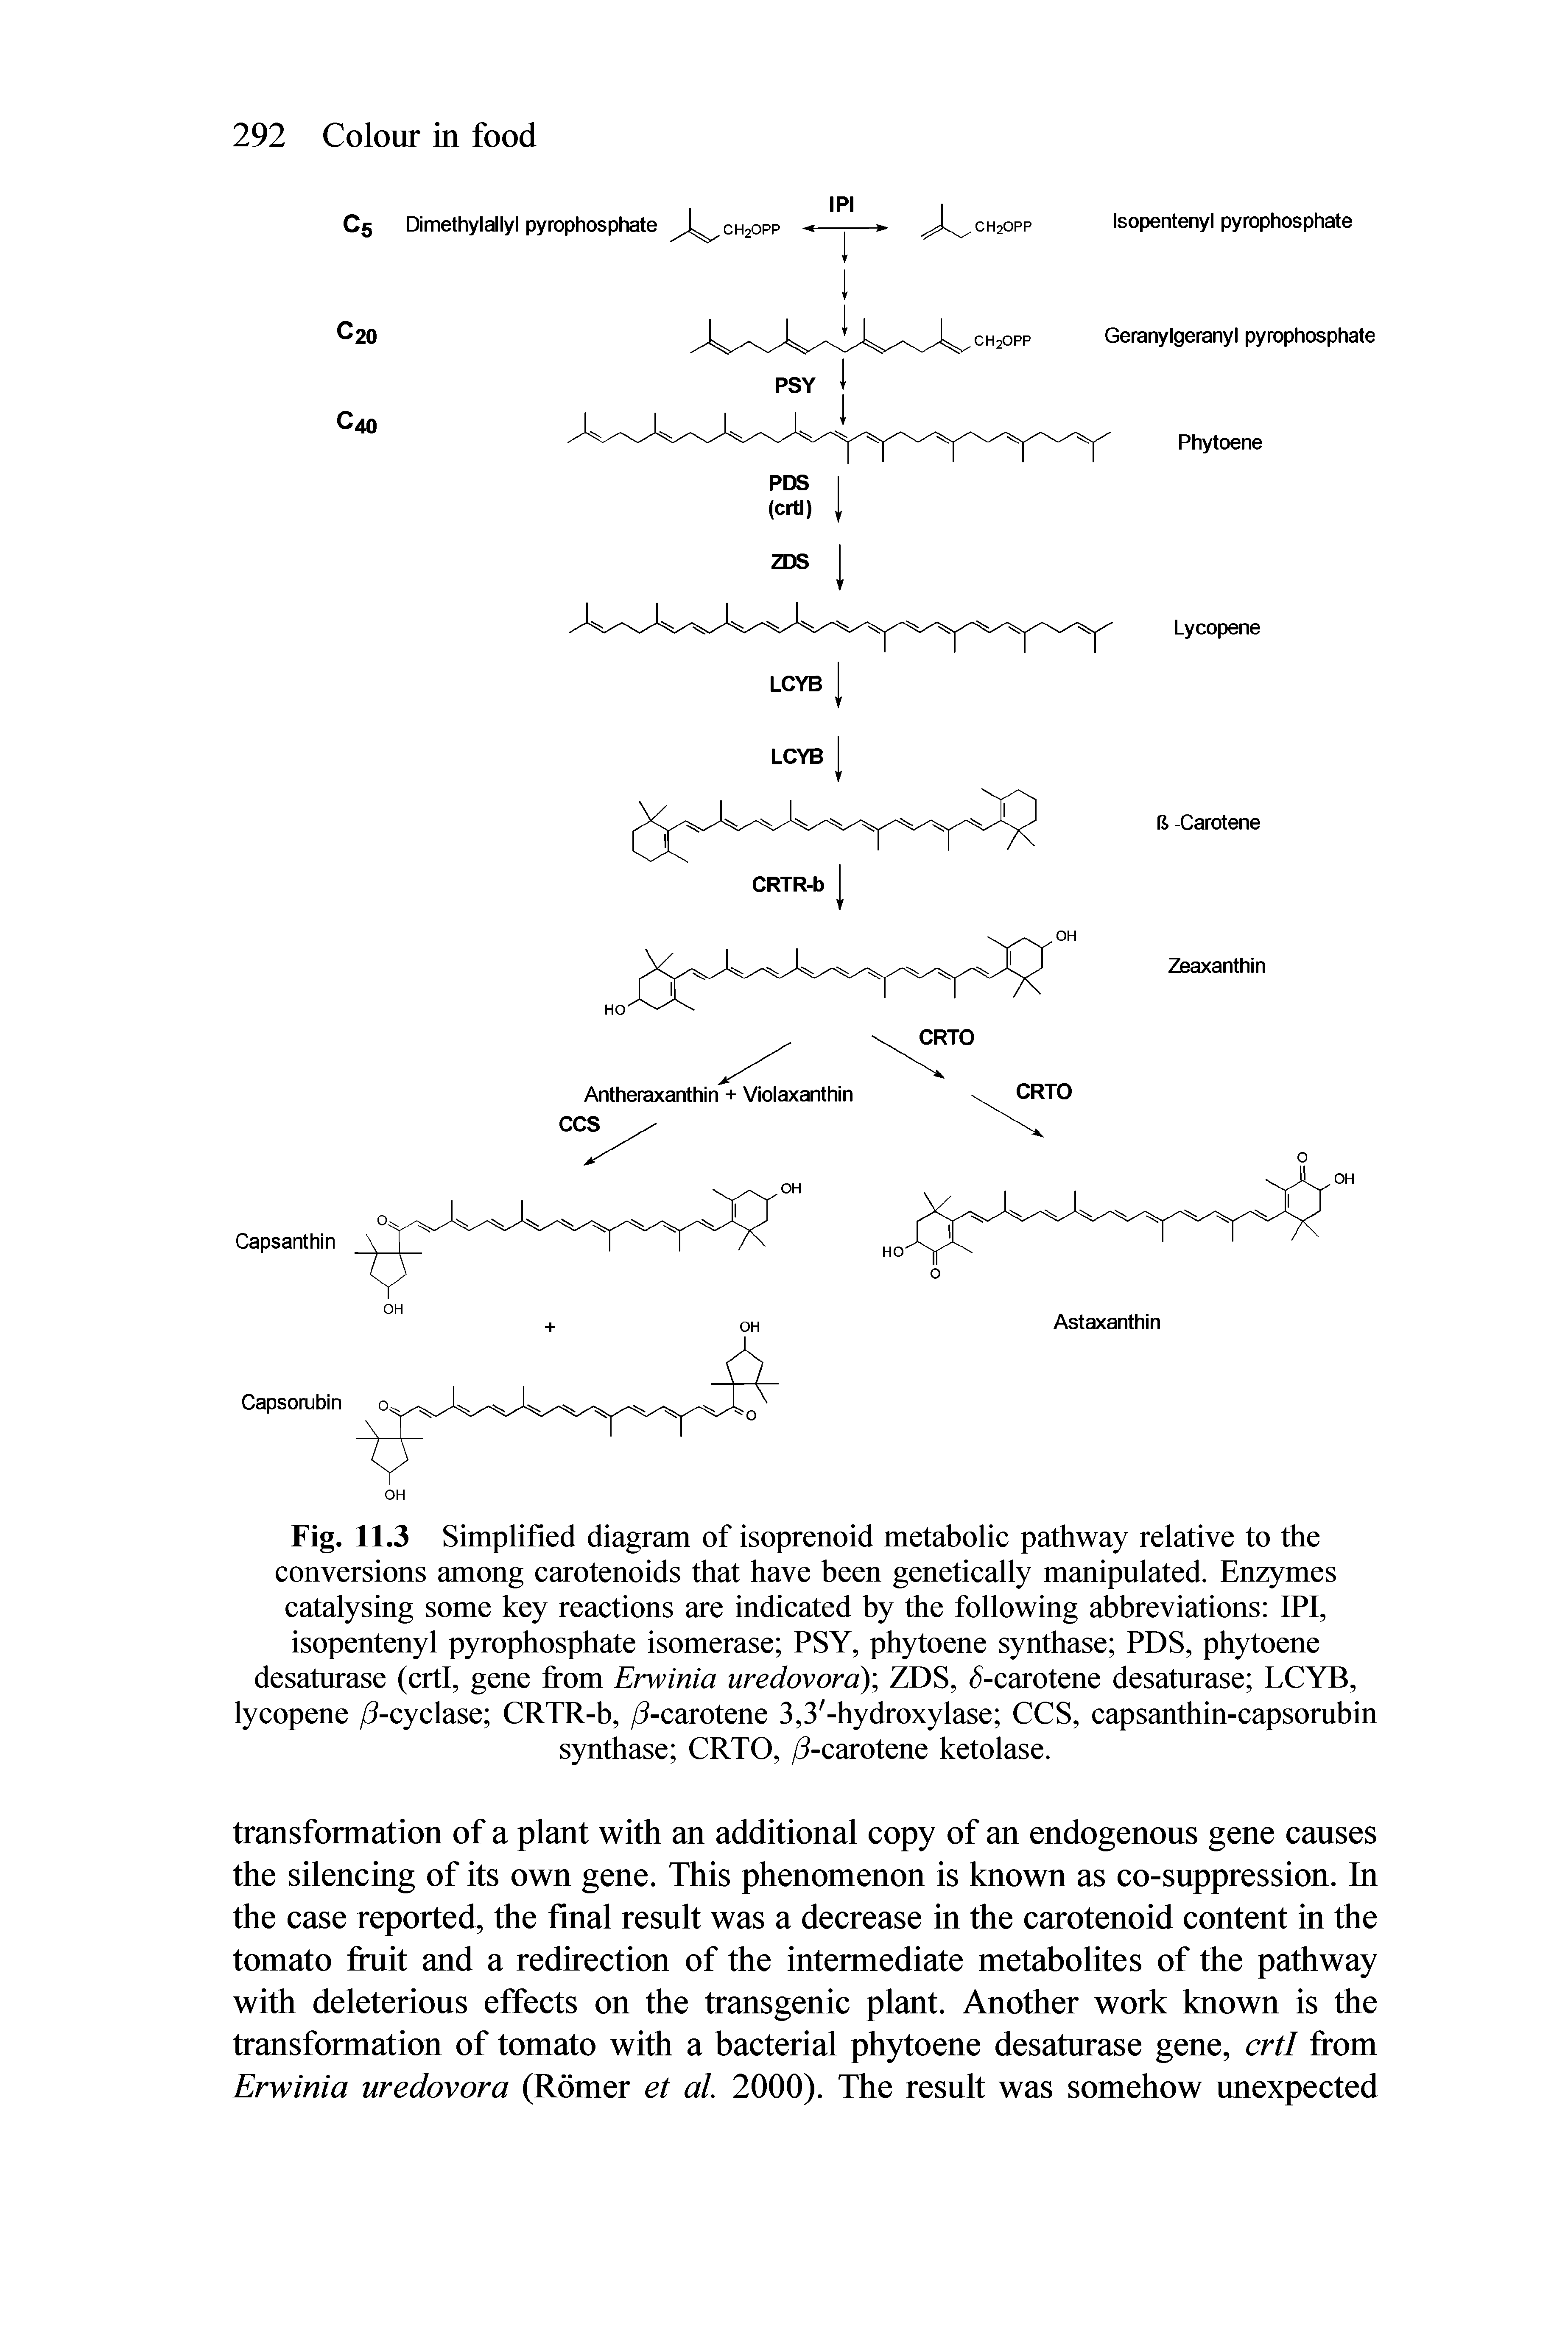 Fig. 11.3 Simplified diagram of isoprenoid metabolic pathway relative to the conversions among carotenoids that have been genetically manipulated. Enzymes catalysing some key reactions are indicated by the following abbreviations IPI, isopentenyl pyrophosphate isomerase PSY, phytoene synthase PDS, phytoene desaturase (crti, gene from Erwinia uredovora) ZDS, -carotene desaturase LCYB, lycopene / -cyclase CRTR-b, /3-carotene 3,3 -hydroxylase CCS, capsanthin-capsombin synthase CRTO, /3-carotene ketolase.